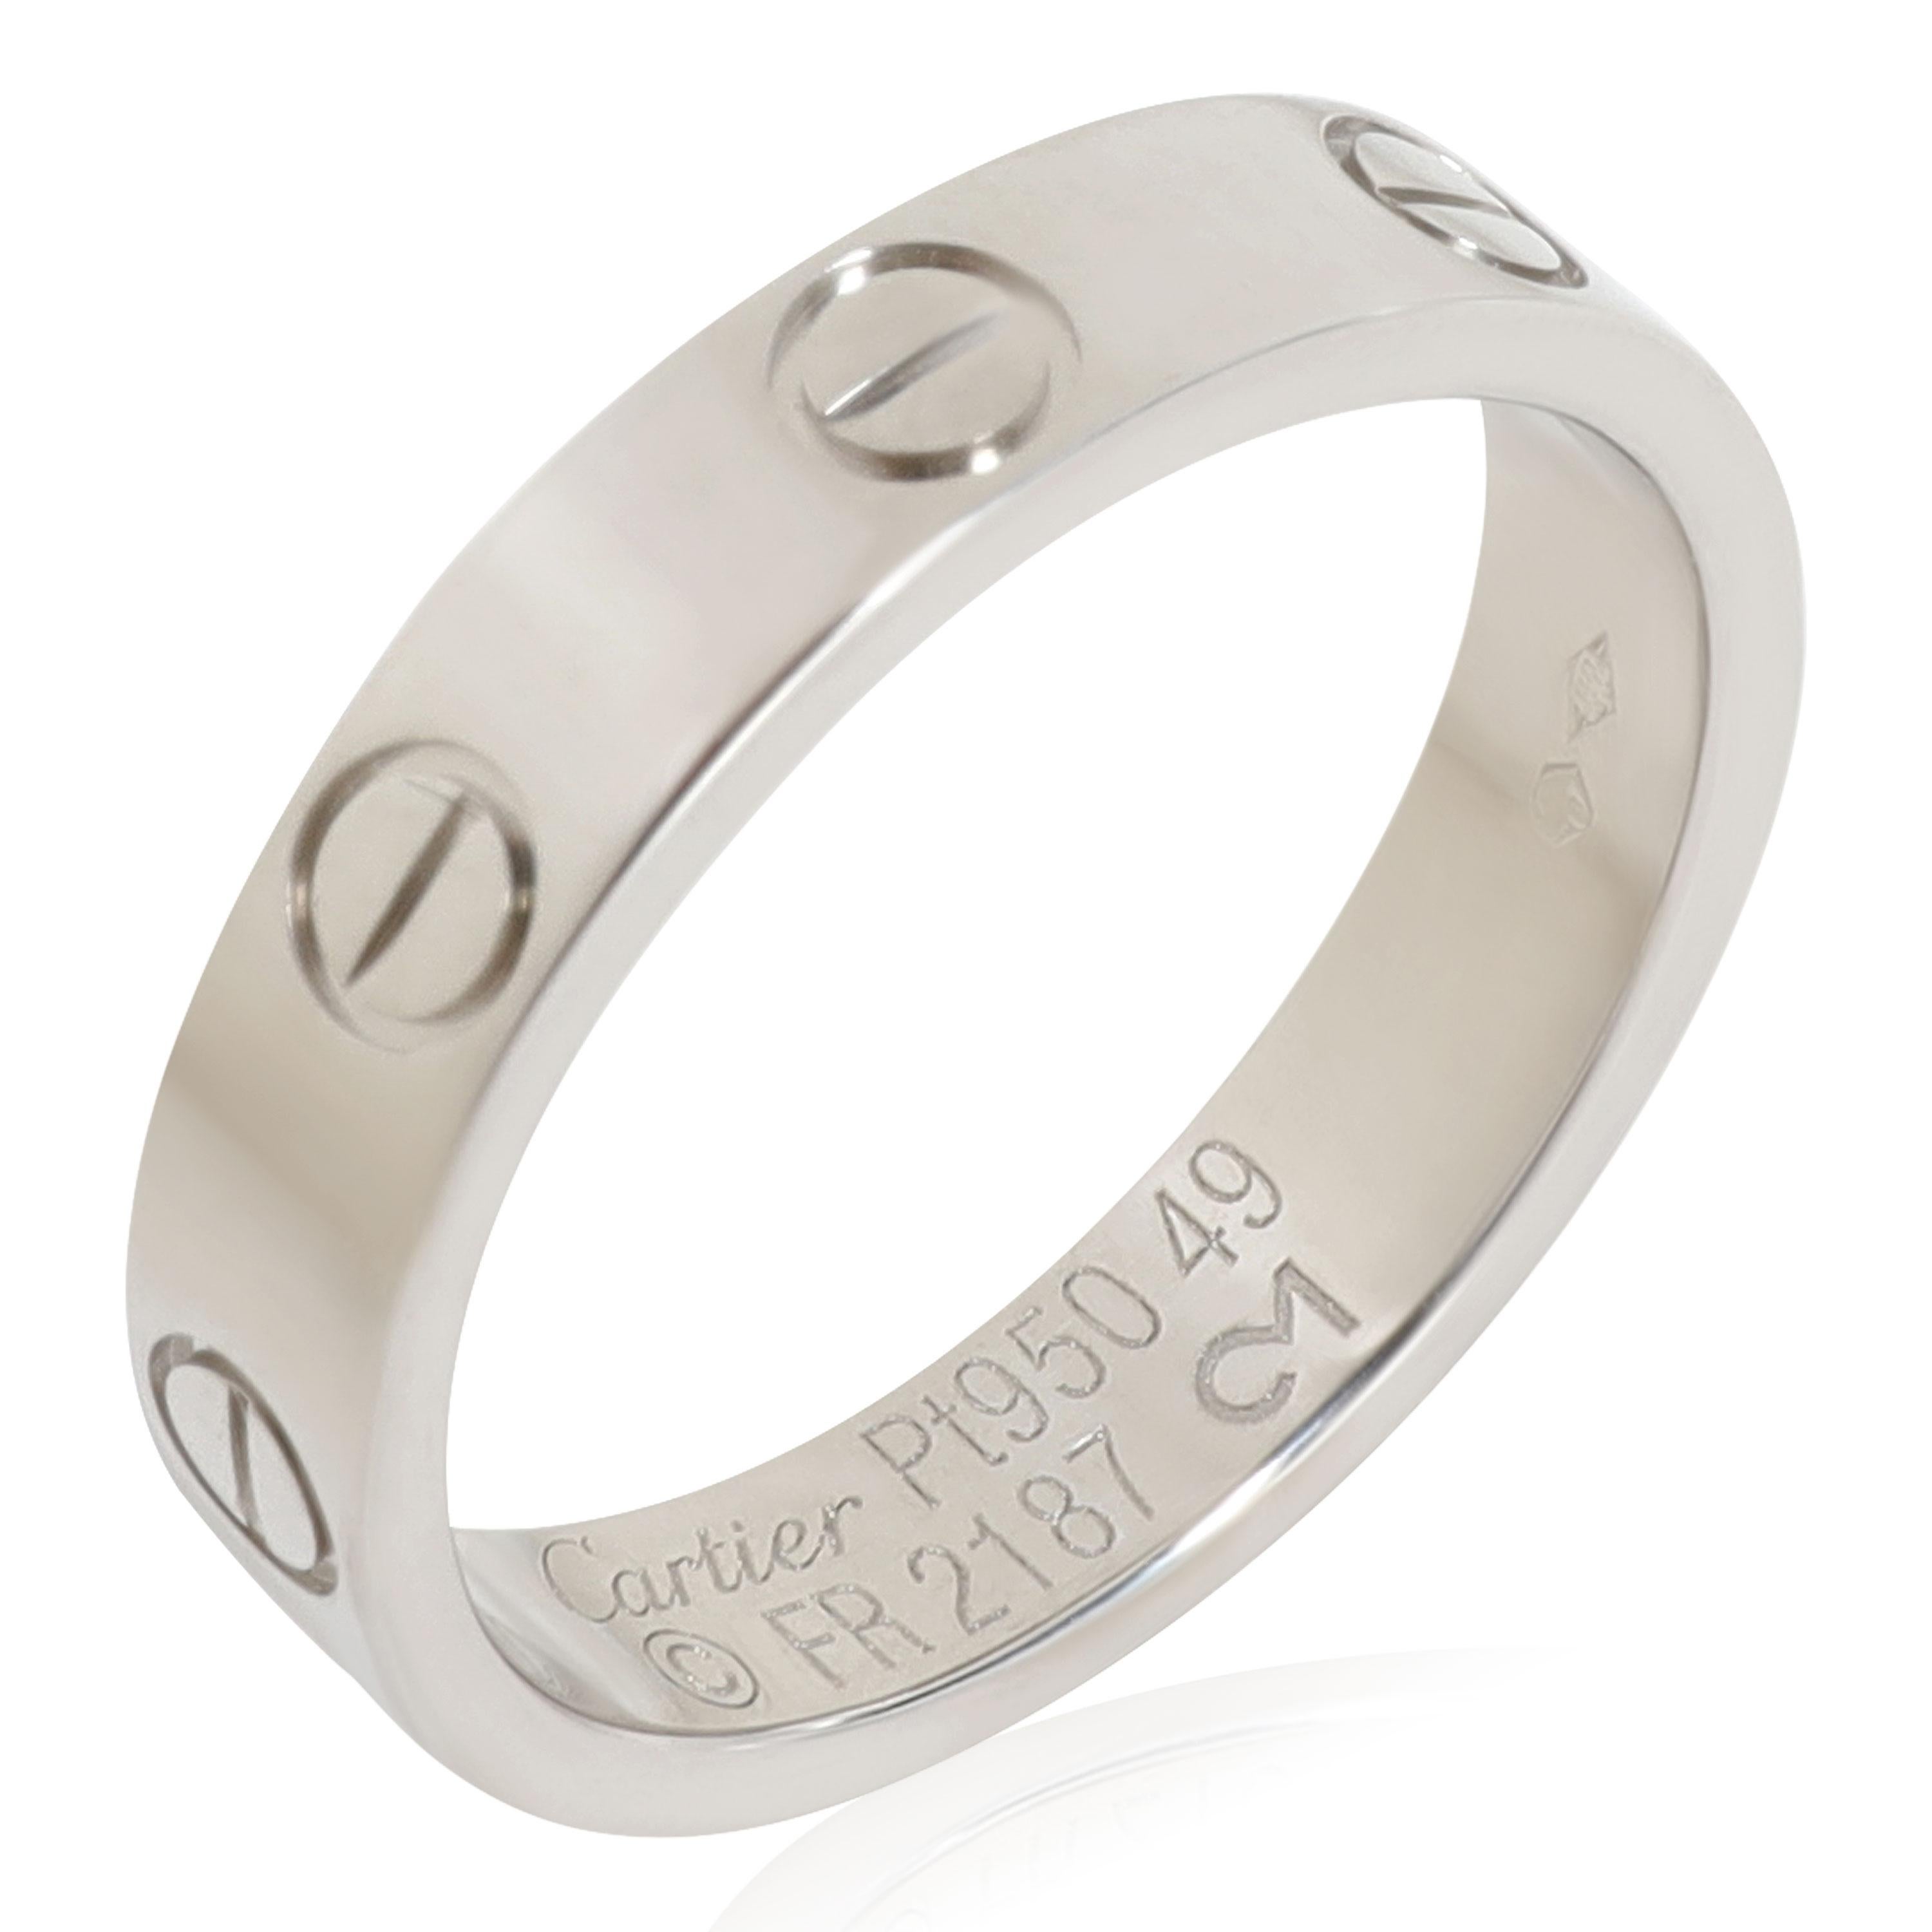 Cartier LOVE Ring in 950 Platinum 

PRIMARY DETAILS
SKU: 116137
Listing Title: Cartier LOVE Ring in 950 Platinum

Condition Description: Retails for 2620 USD. In excellent condition and recently polished. Ring size is 4.75.Comes with Certificate of